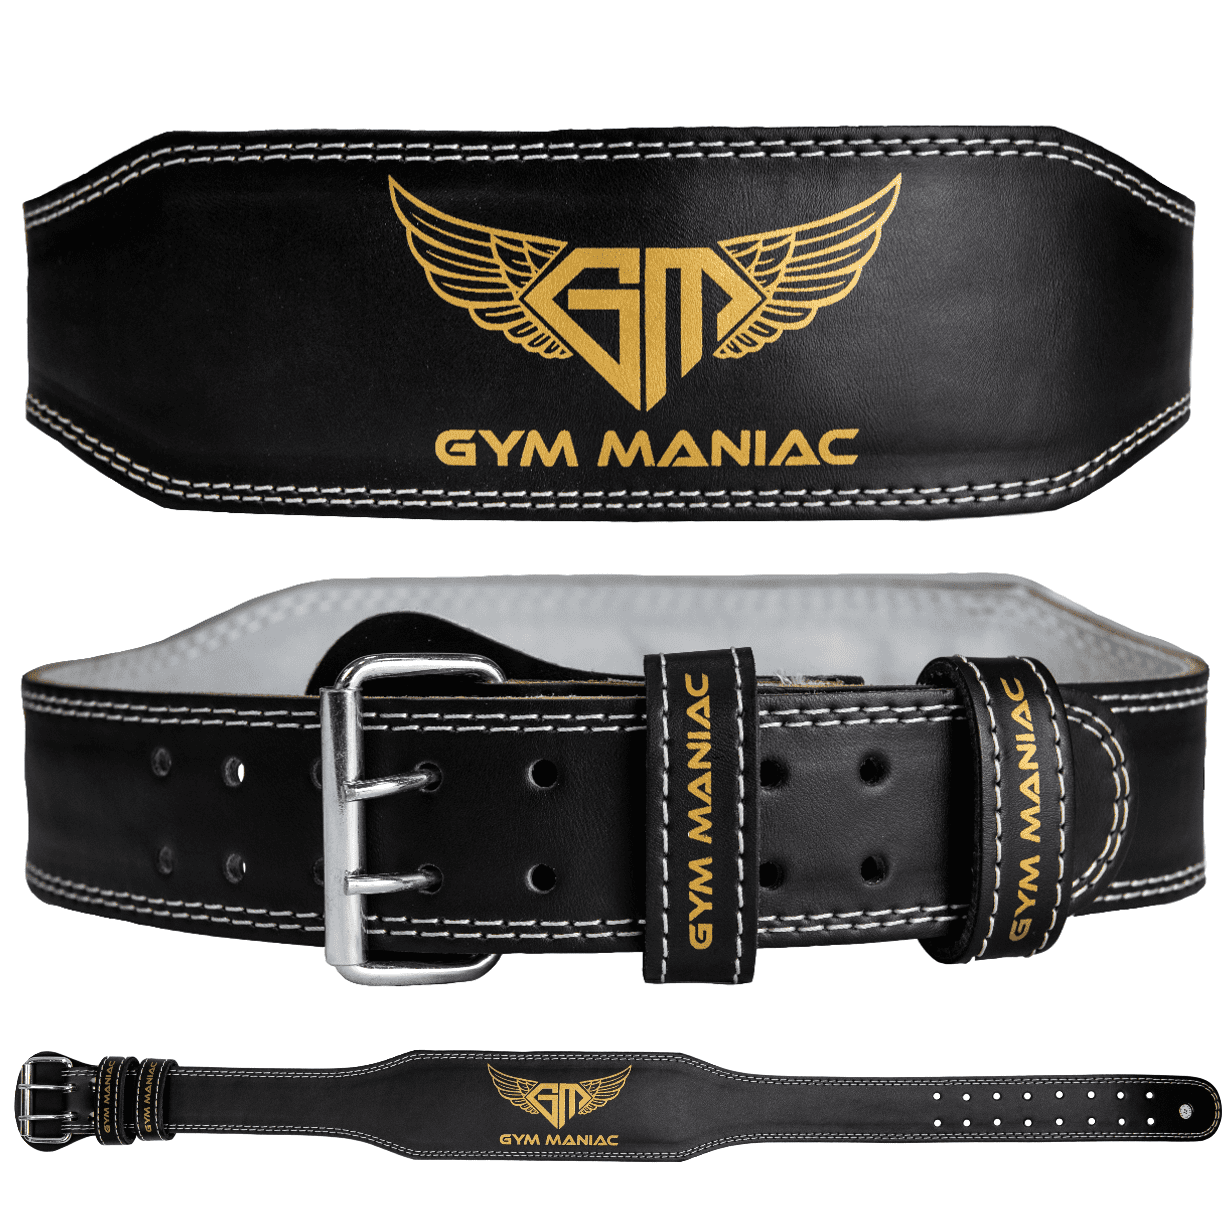 Gym Maniac GM Weight Lifting Waist Gym Belt Adjustable Size Support Your Back & Alleviate Pains Comfy Suede 2 Prong Buckle Reinforced Stitching